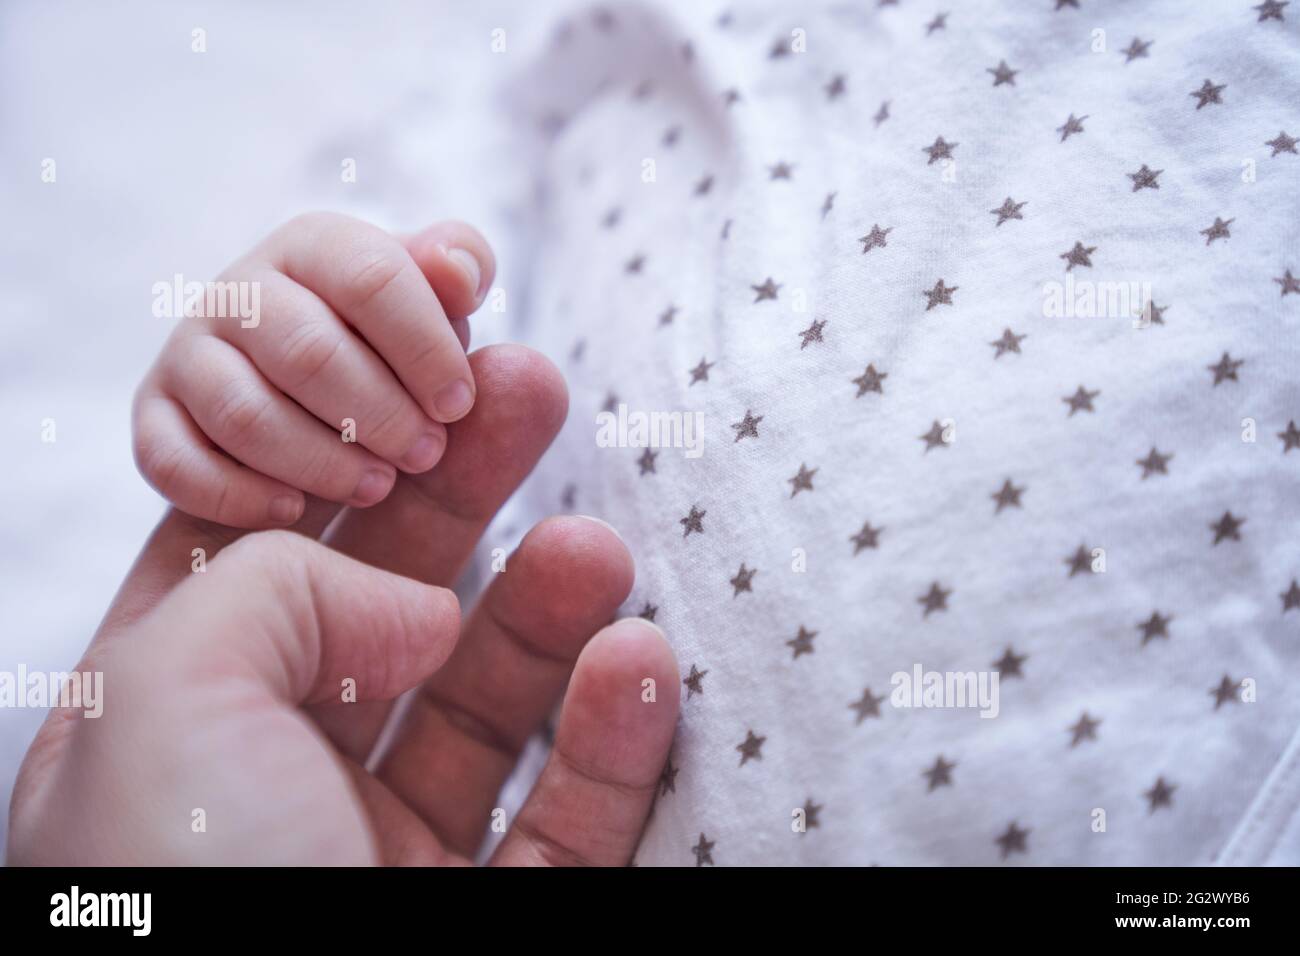 https://c8.alamy.com/comp/2G2WYB6/mothers-hand-holding-baby-hand-the-baby-is-one-month-old-cute-little-hand-with-small-fingers-concept-of-love-and-care-background-high-quality-photo-2G2WYB6.jpg